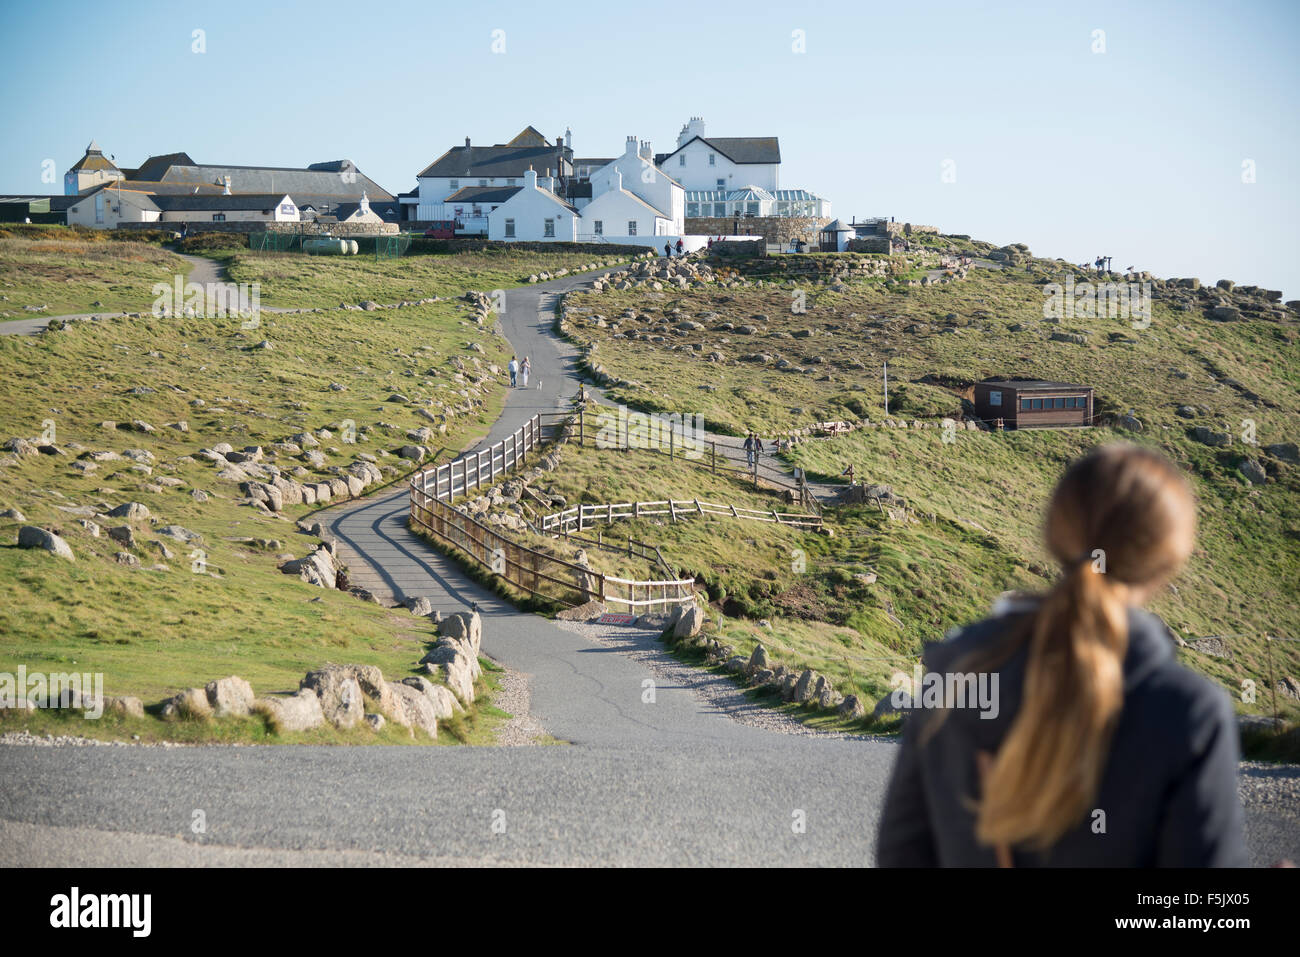 A view of a path leading to a tourist complex at lands end in cornwall Stock Photo